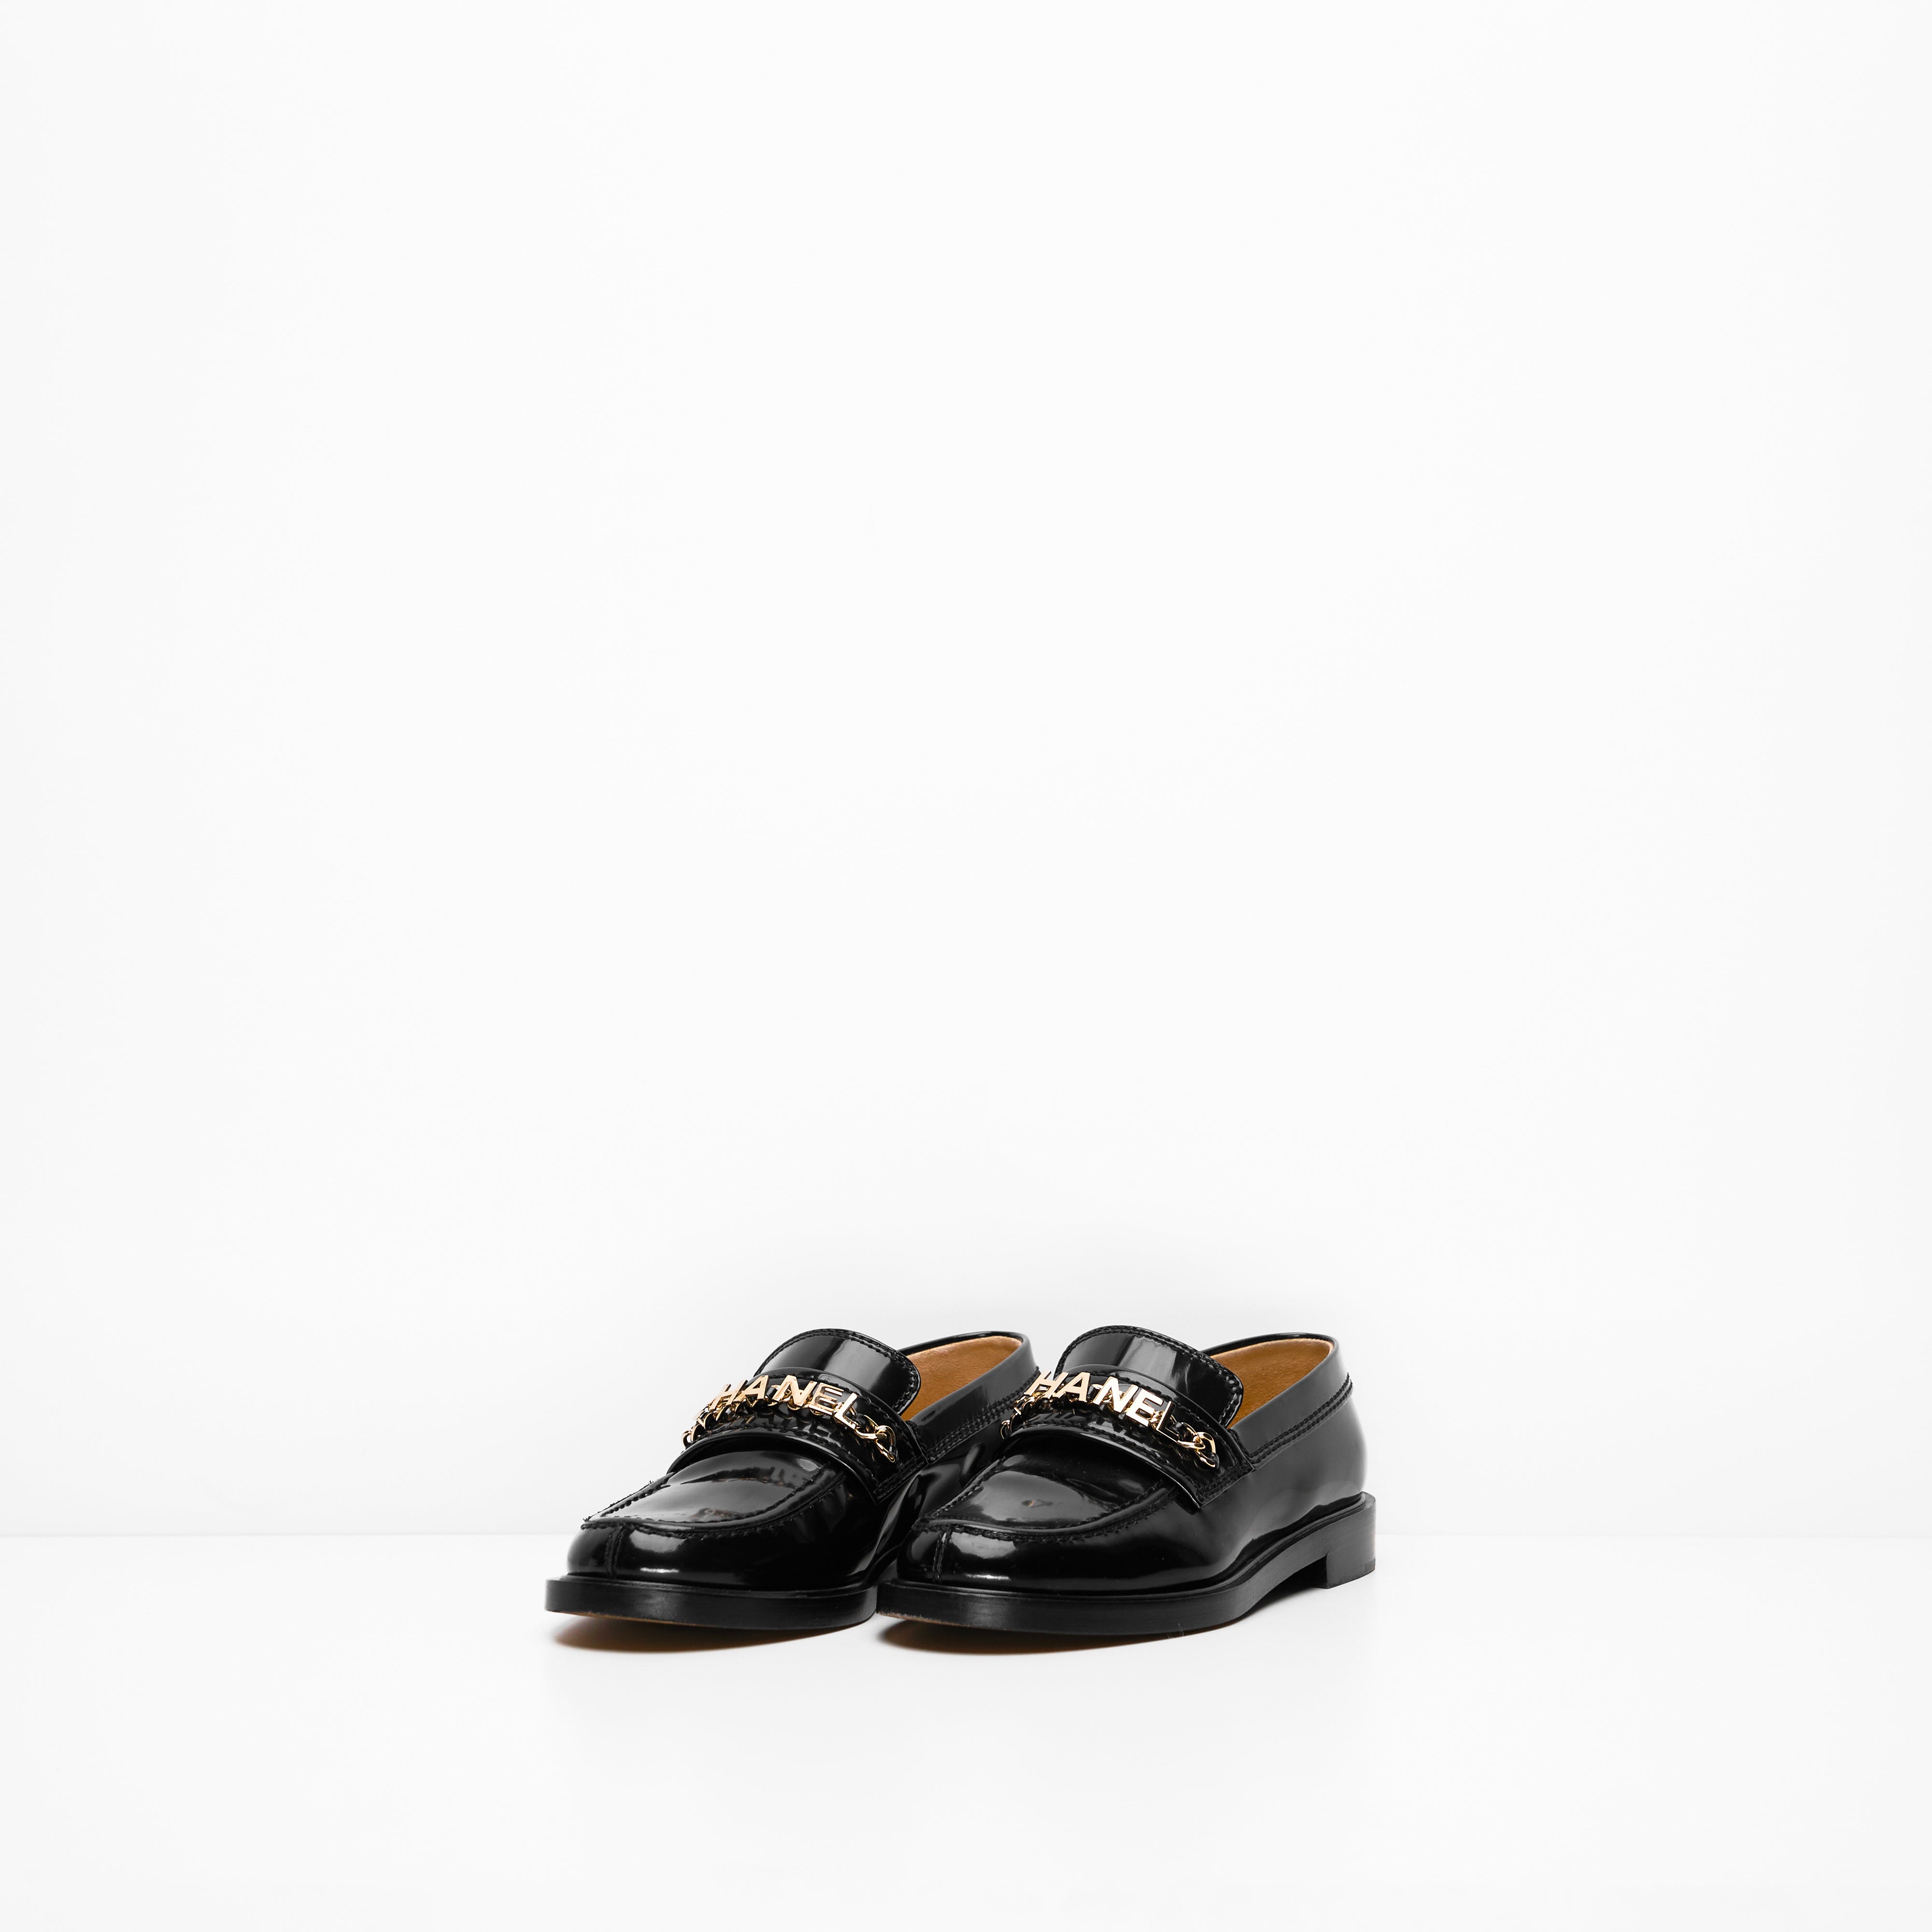 Chanel Patent Leather Moccasins Shoes